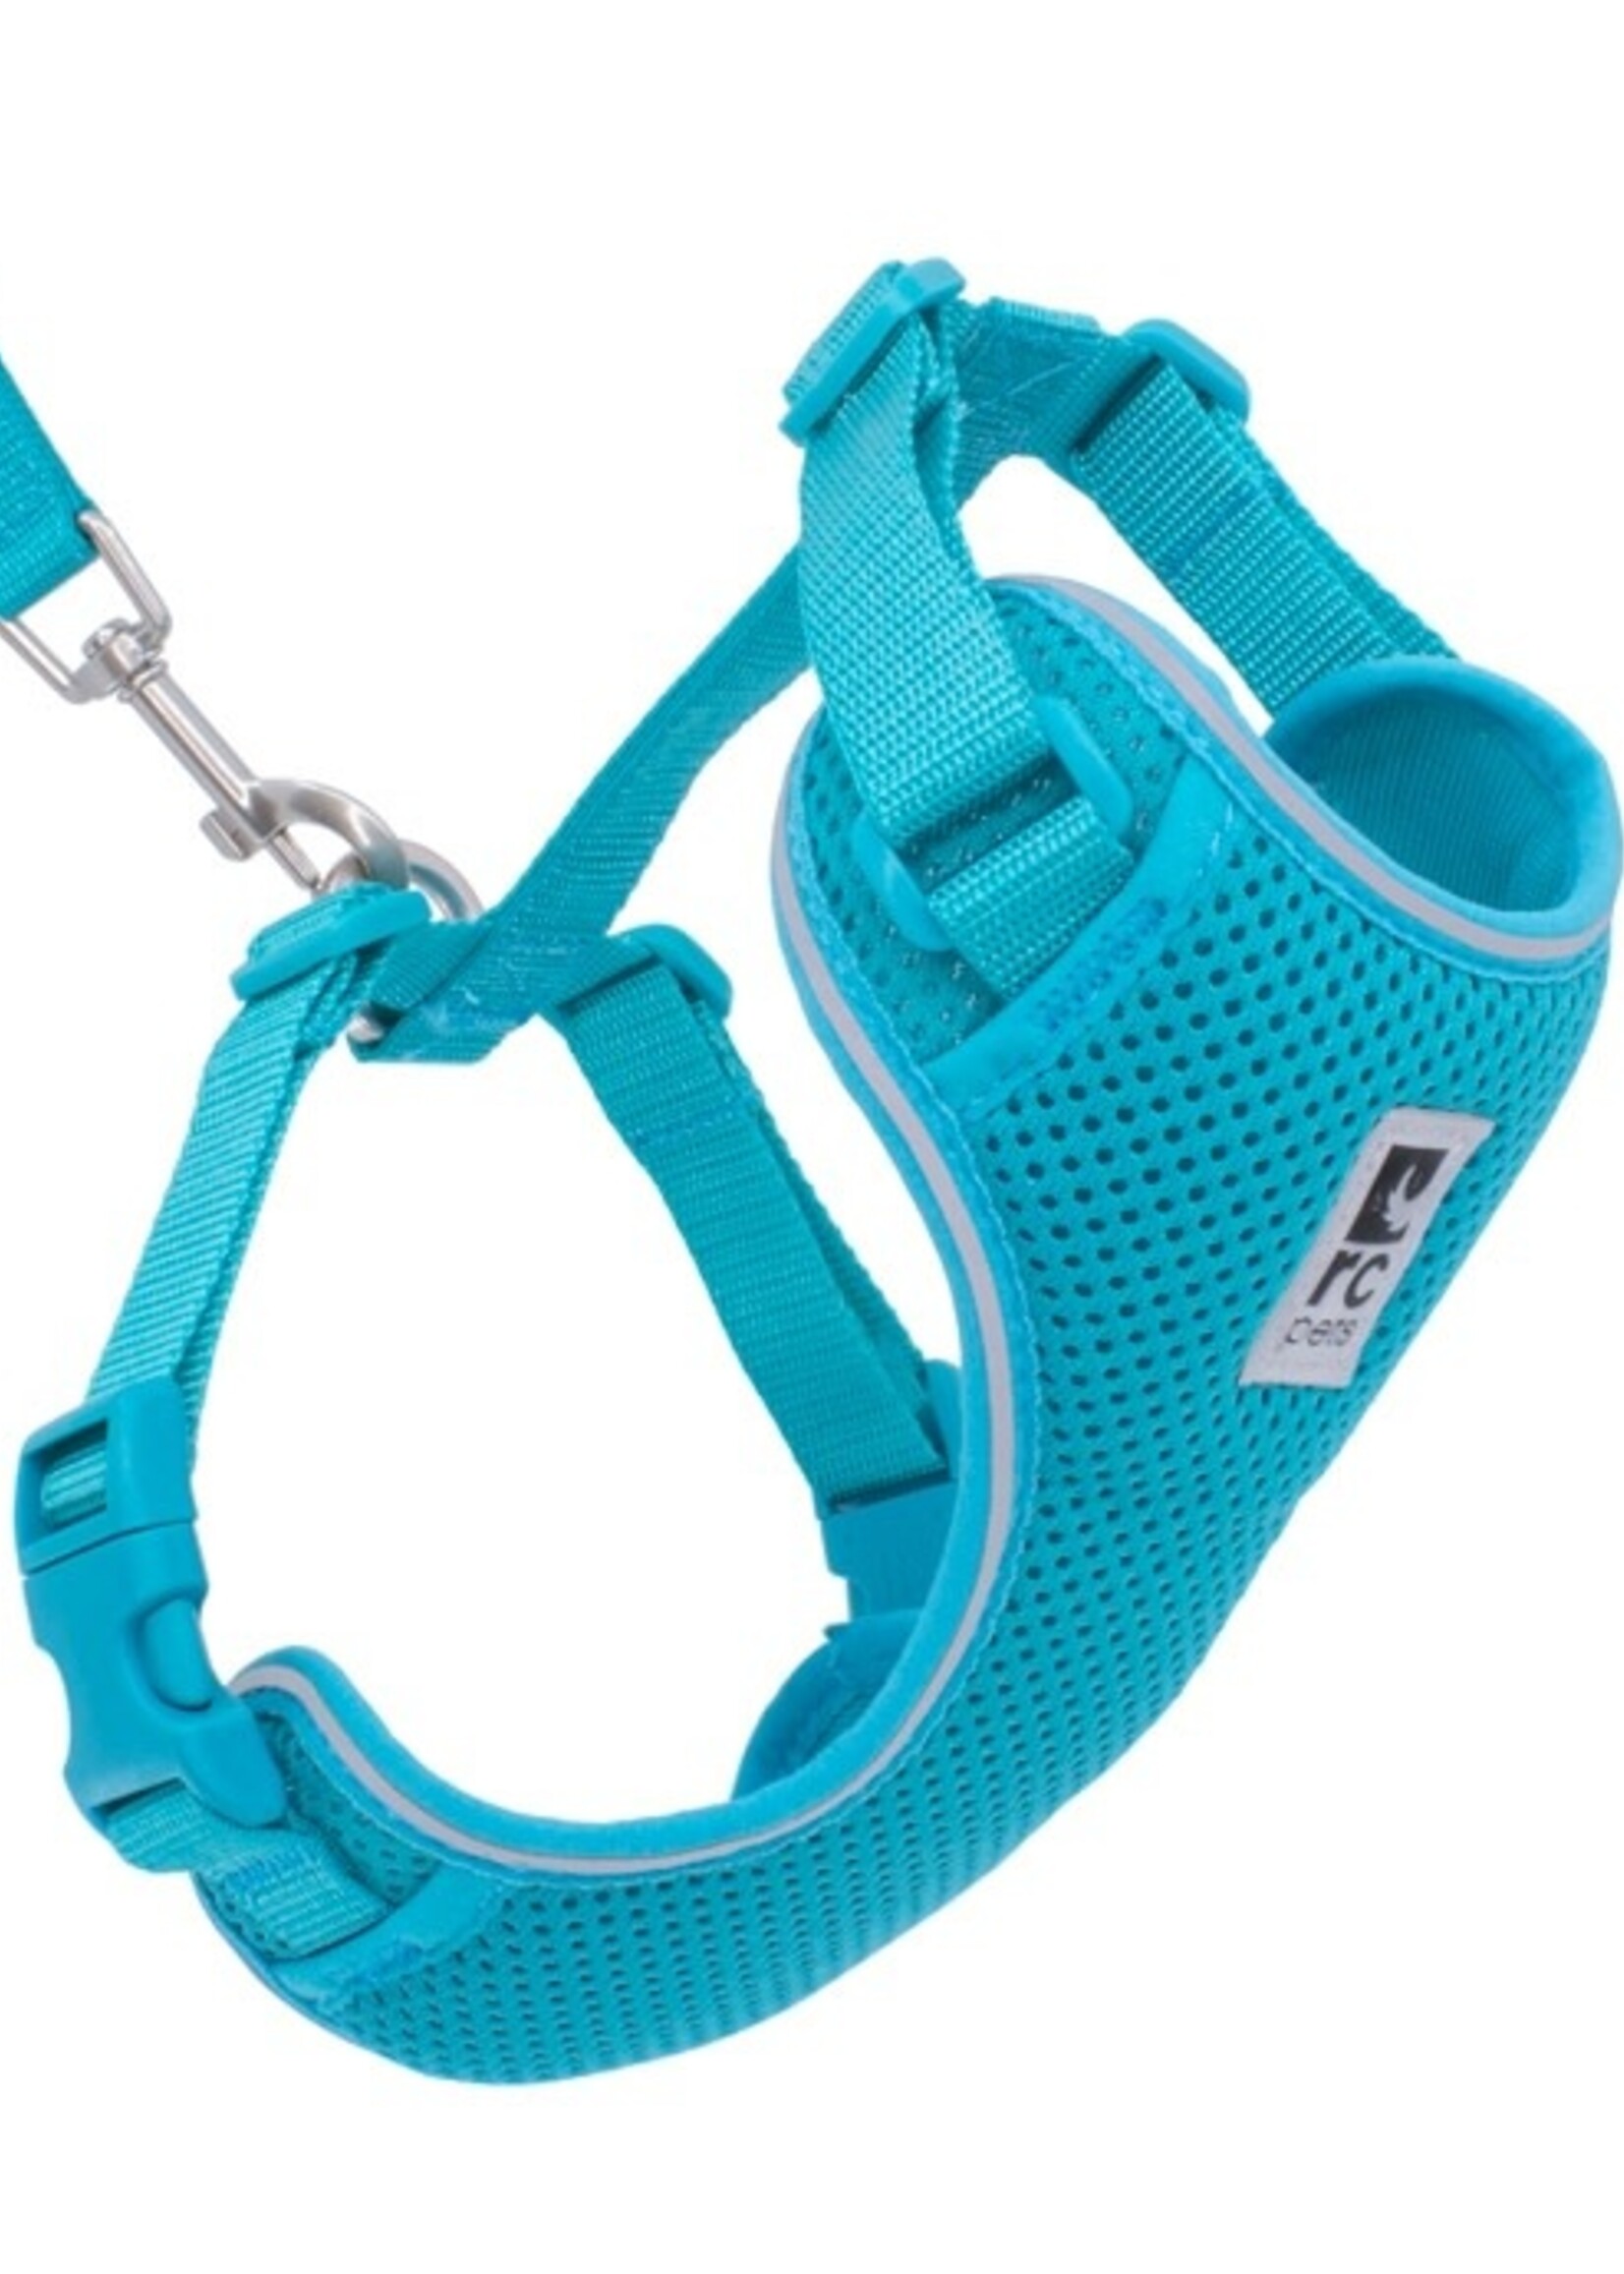 RC Pets Adventure Kitty Harness - Teal